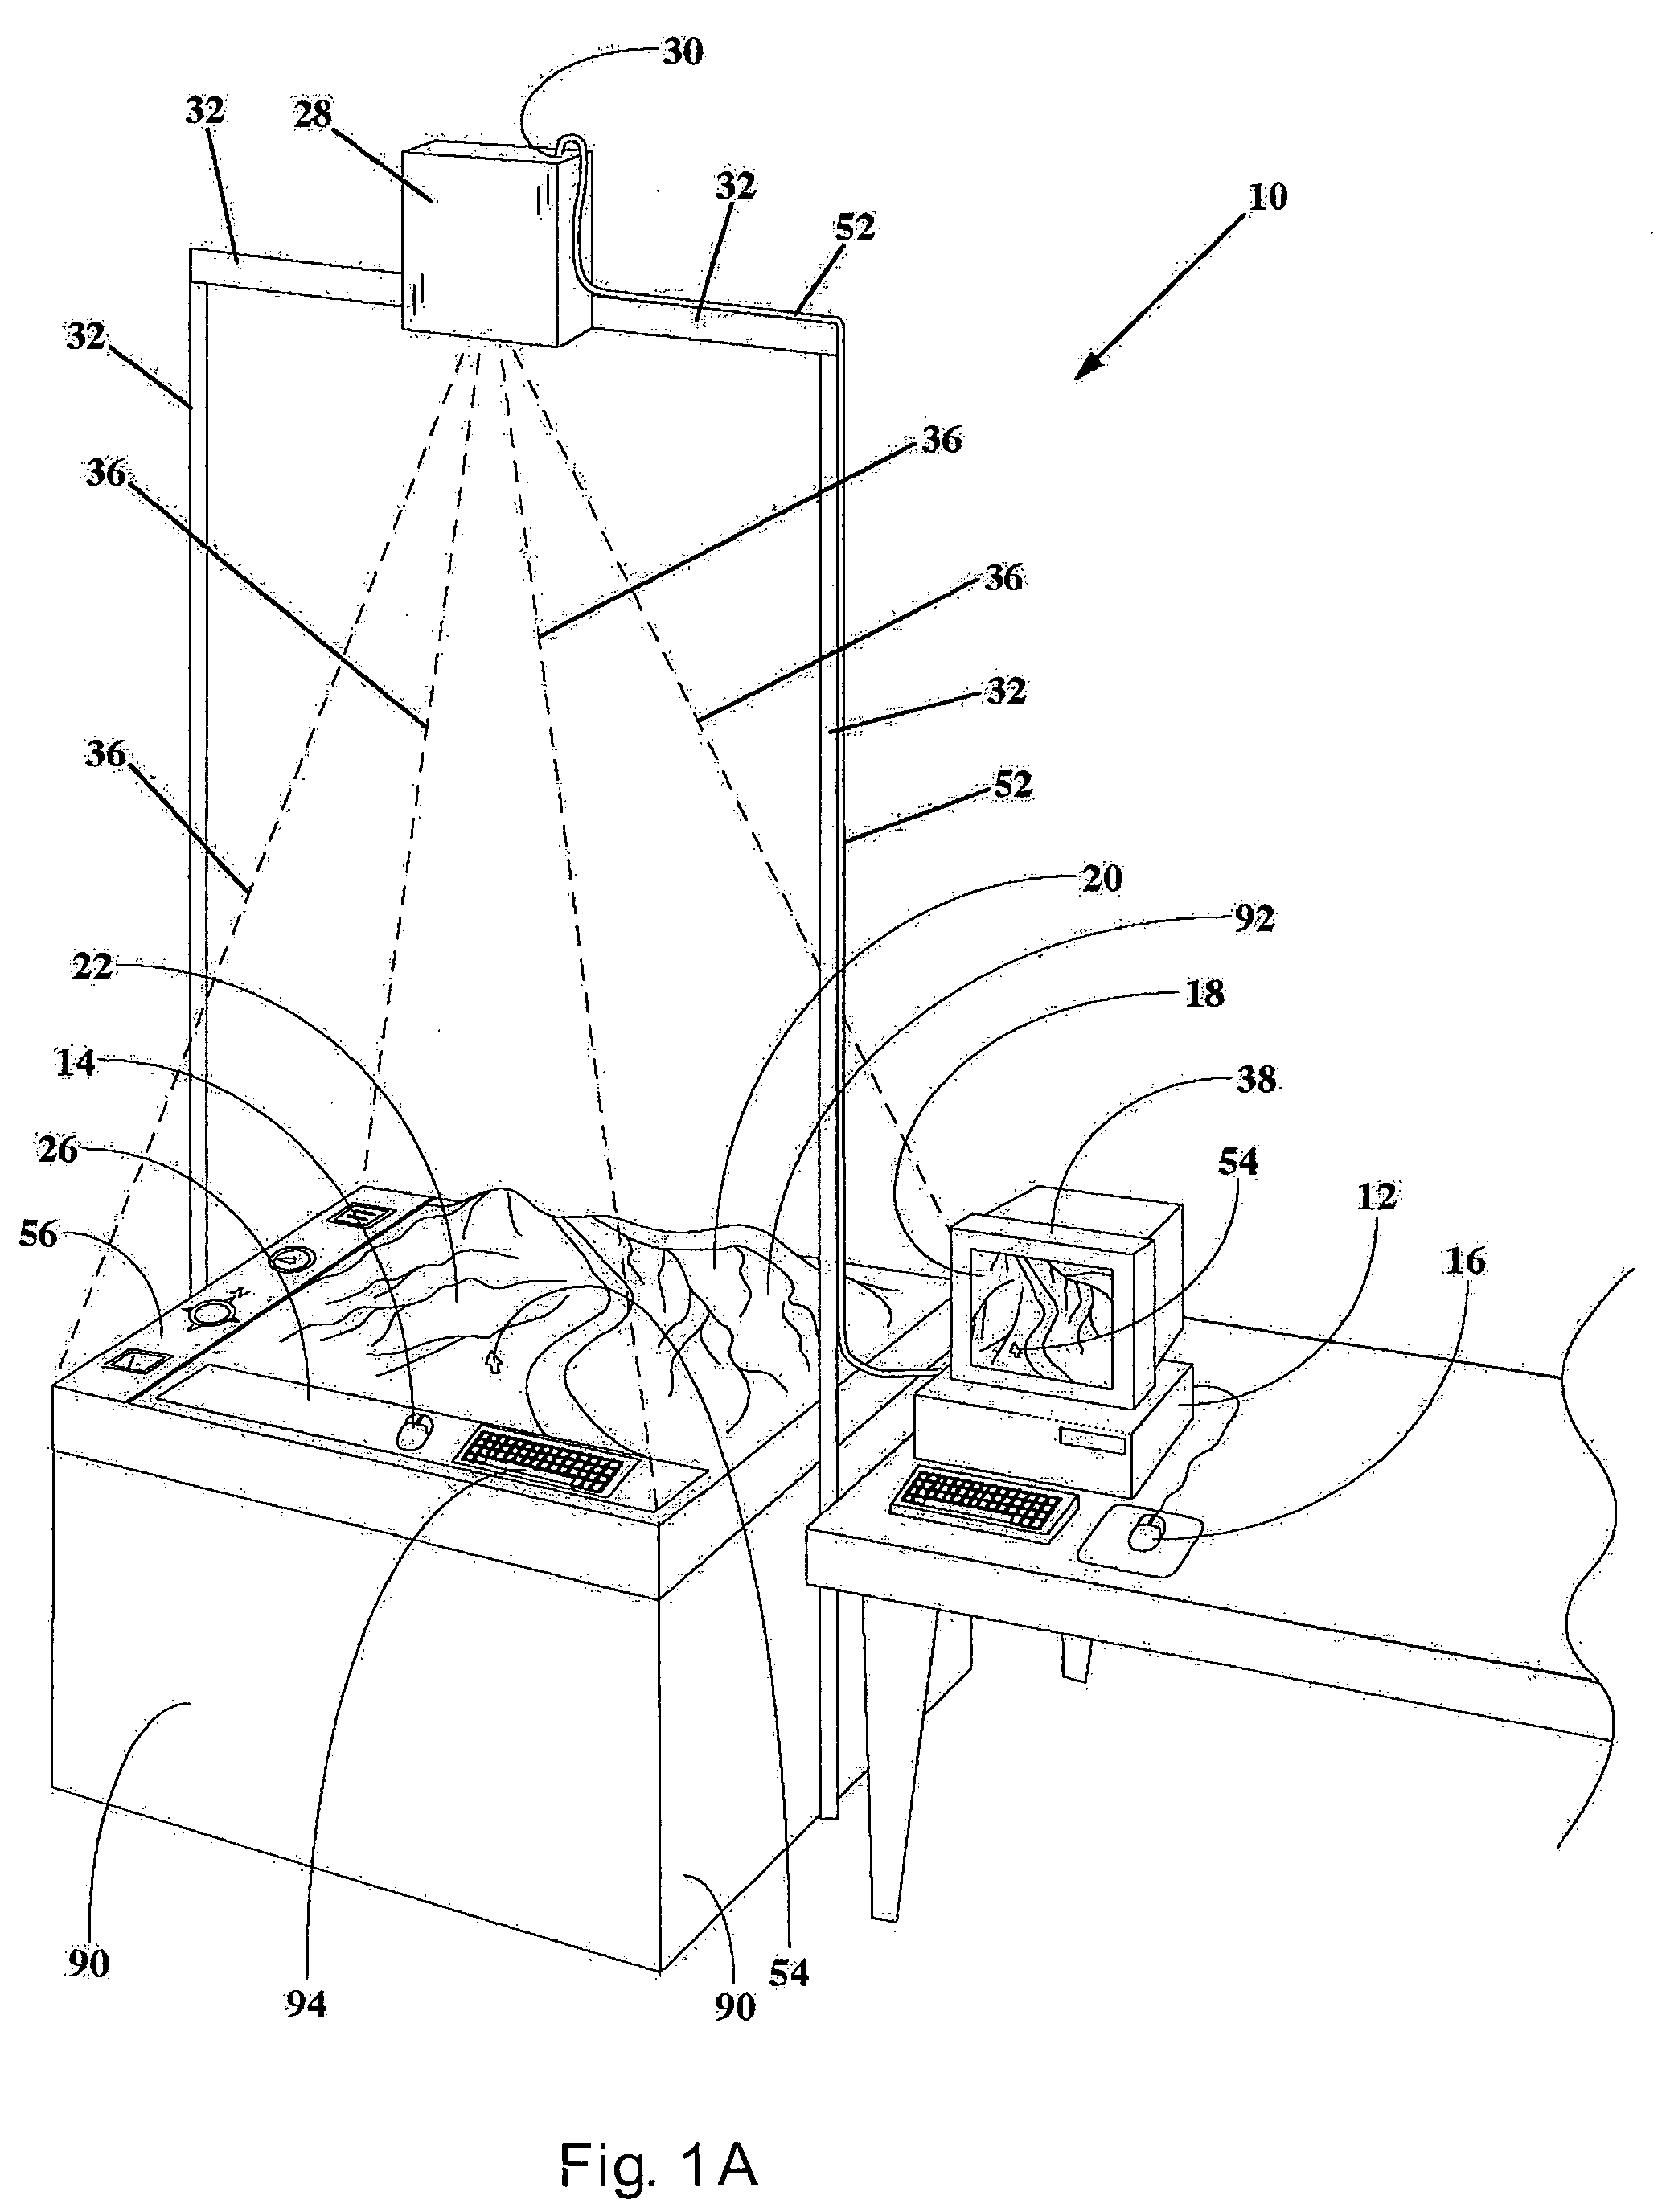 Three-dimensional cartographic user interface system